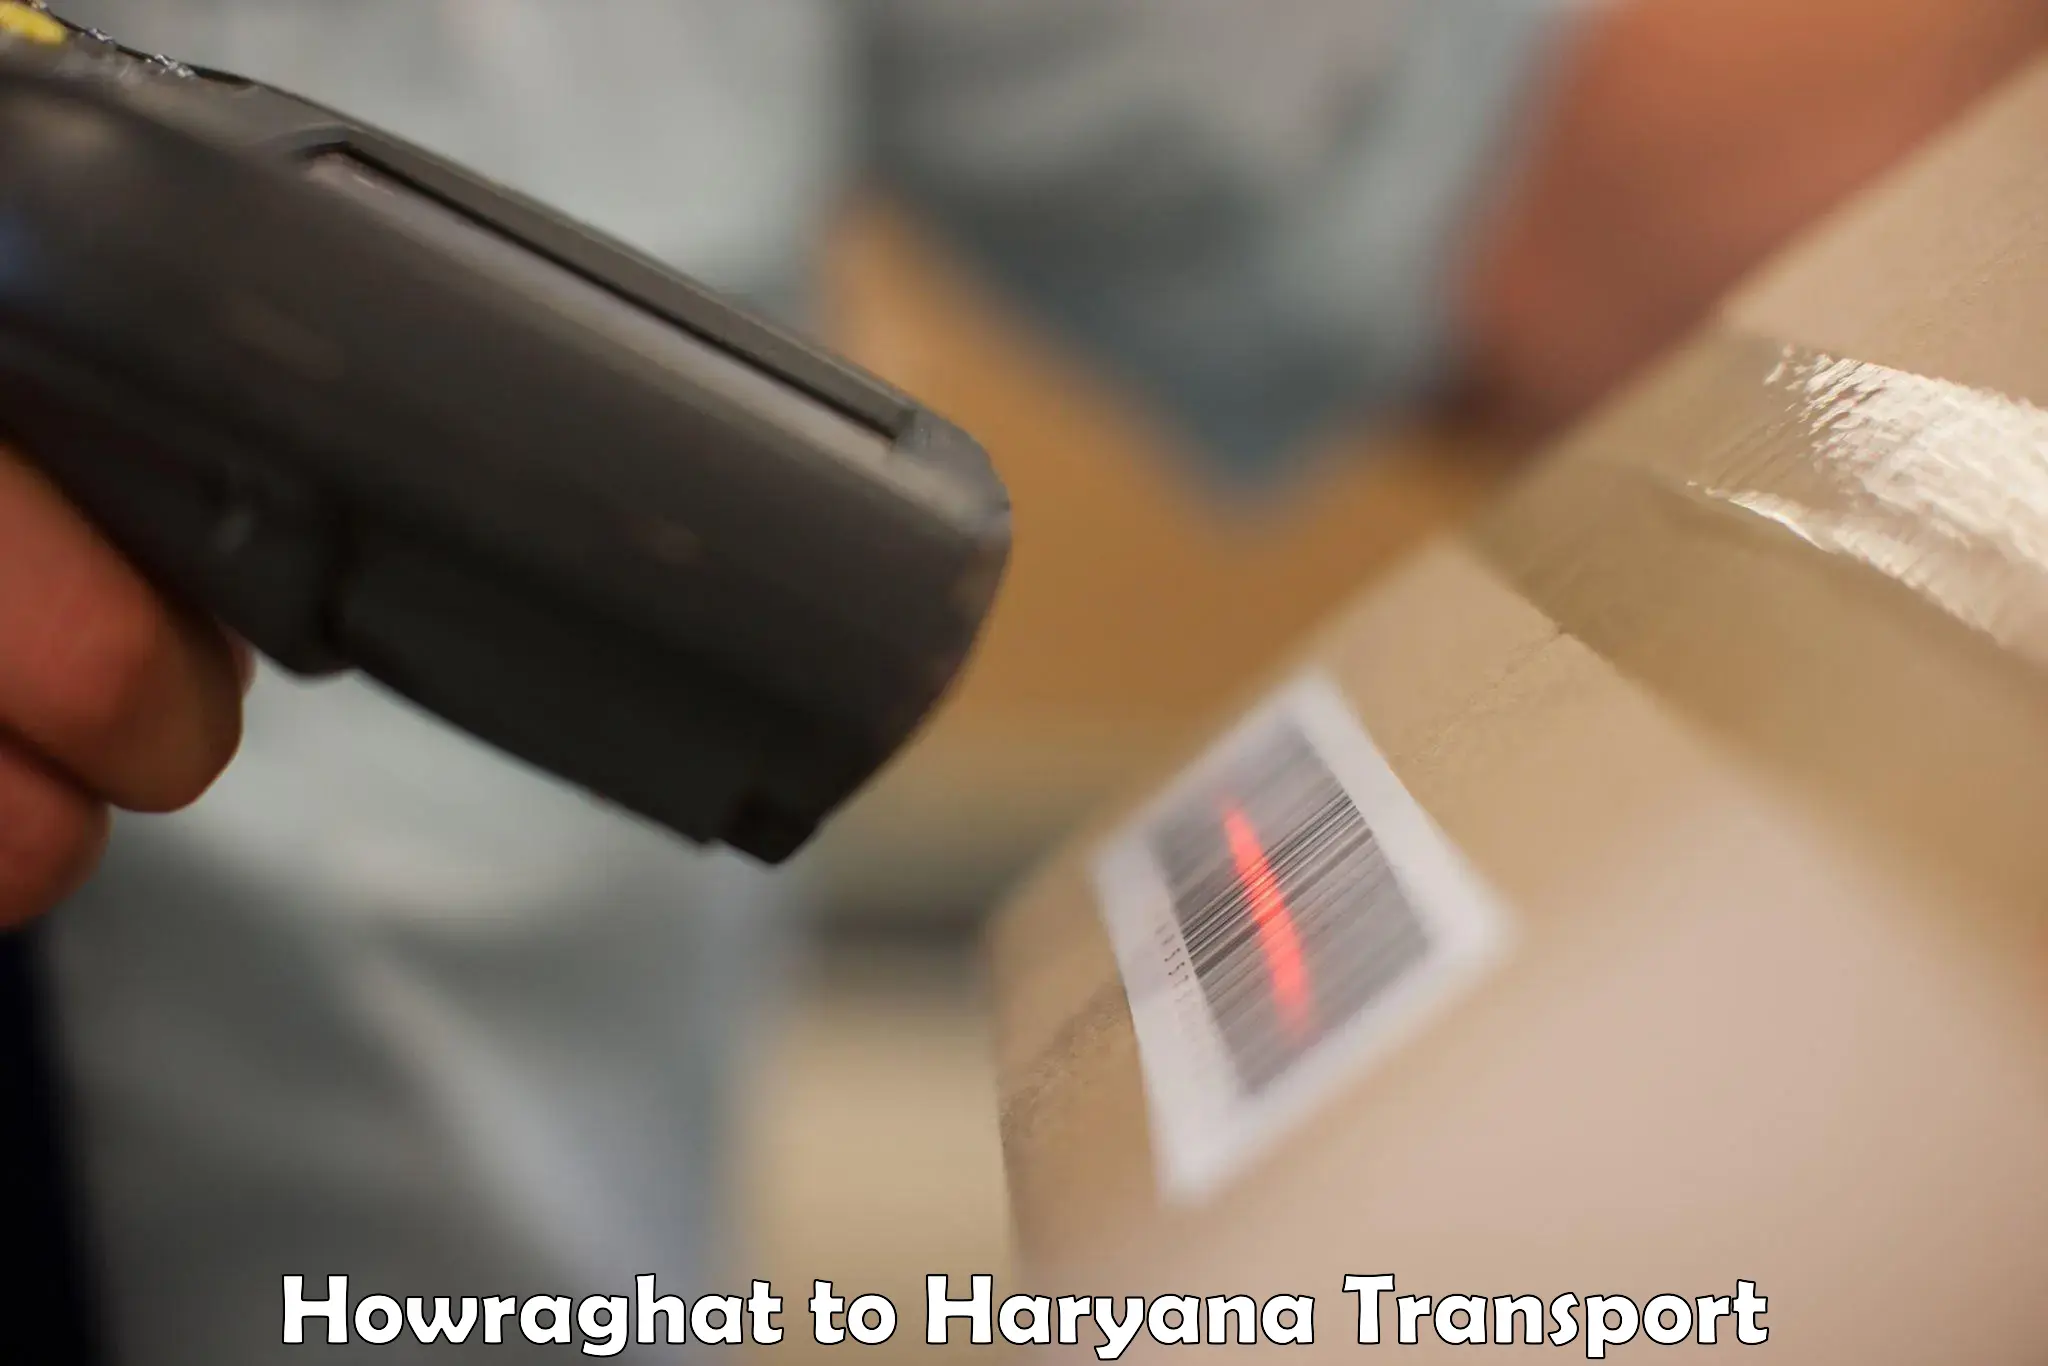 Air freight transport services Howraghat to Bilaspur Haryana